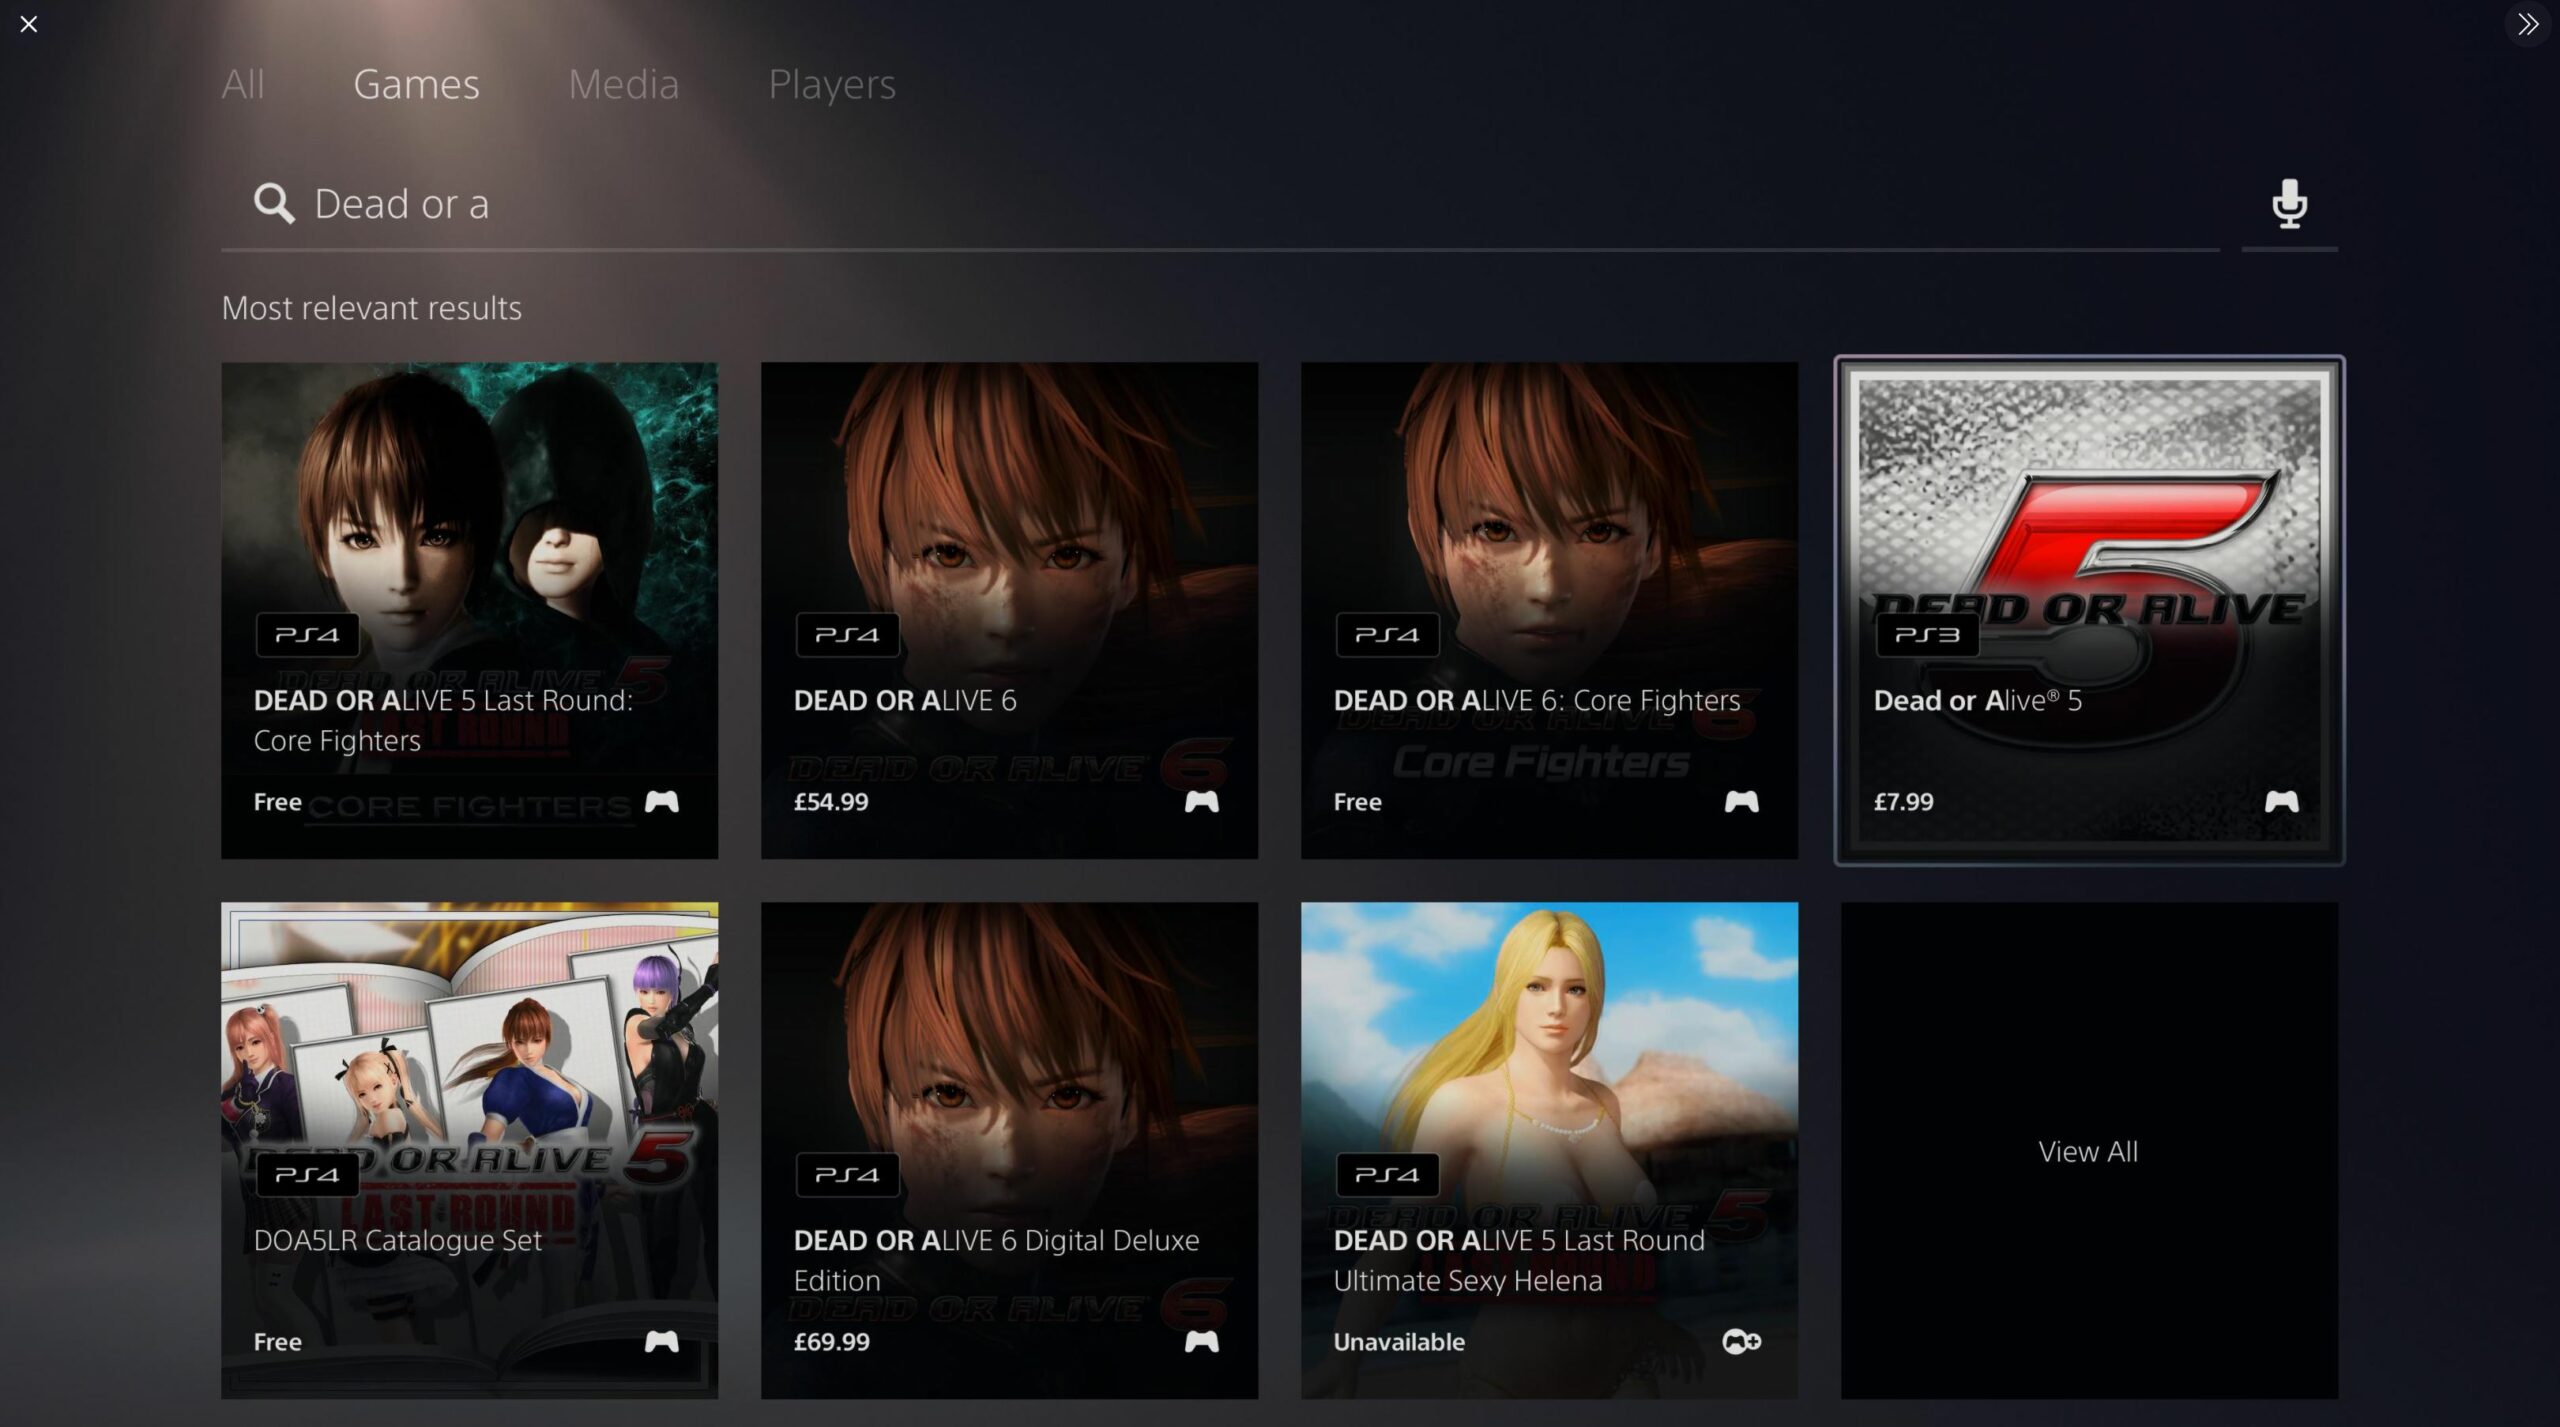 PS3 Games Are Appearing on the PS5 Store - Gameranx